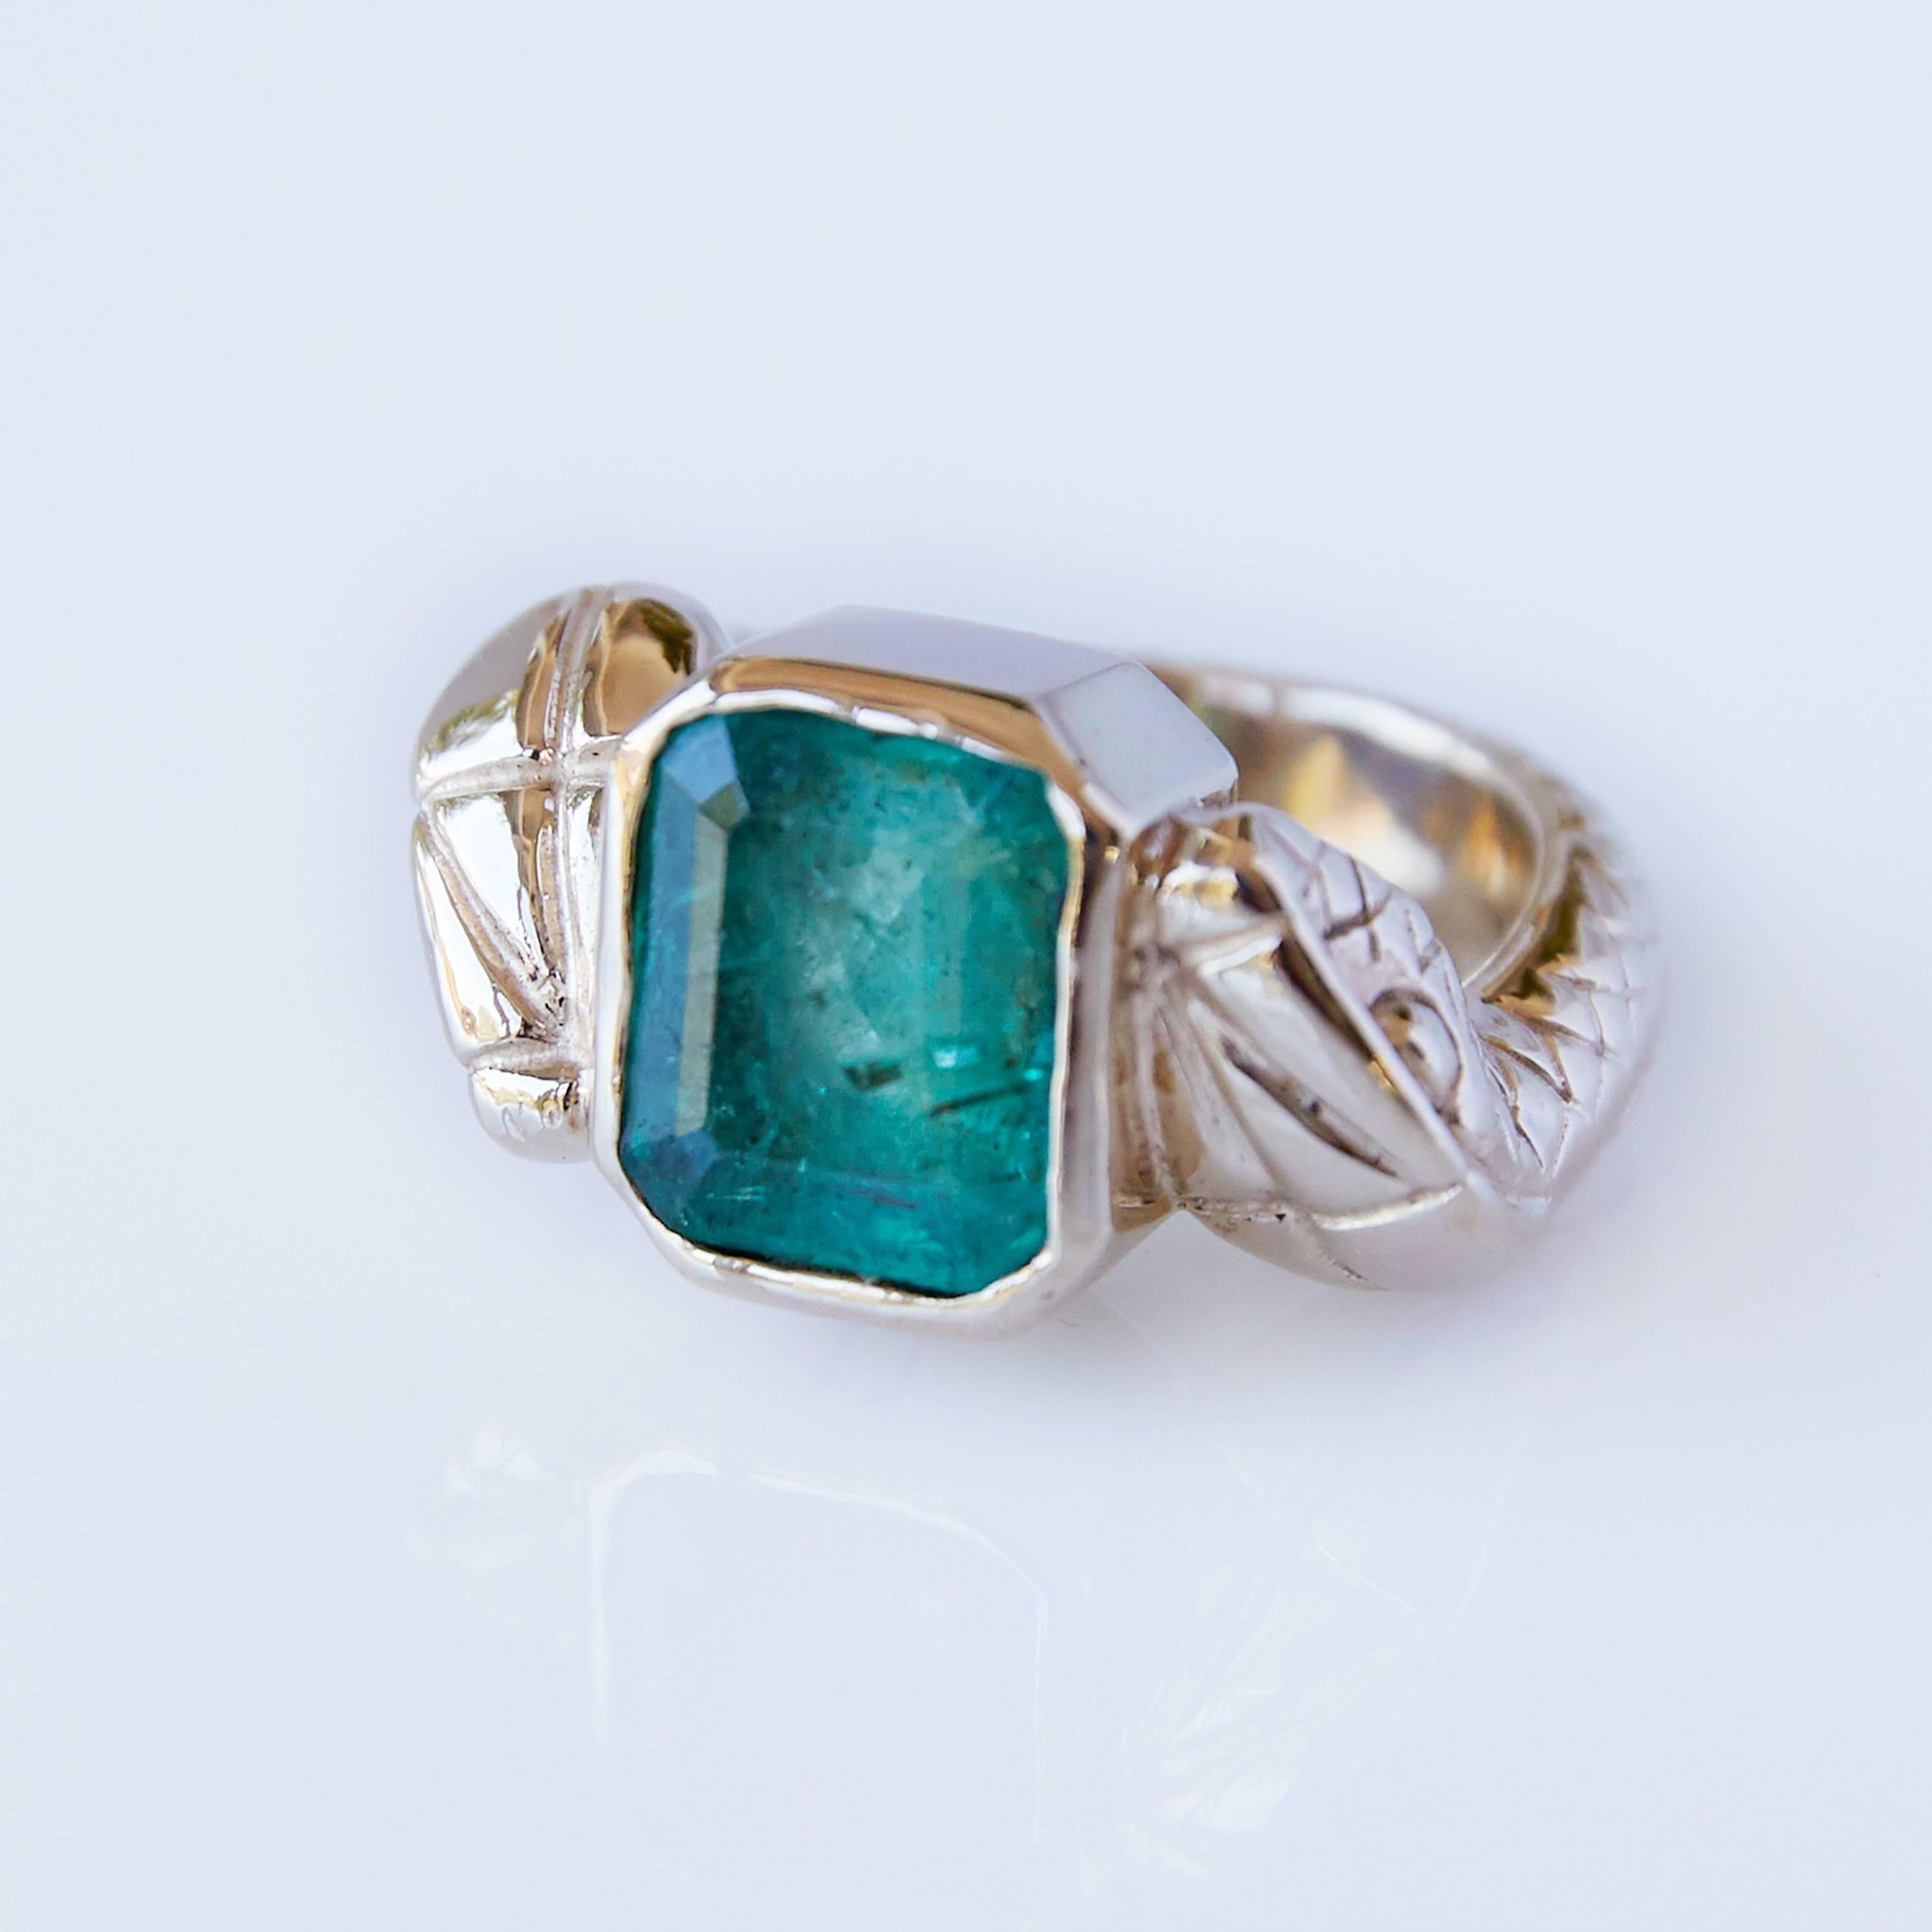 Baguette Cut Emerald Baguette Snake Ring Gold Fashion Cocktail Ring Animal Jewelry J Dauphin For Sale